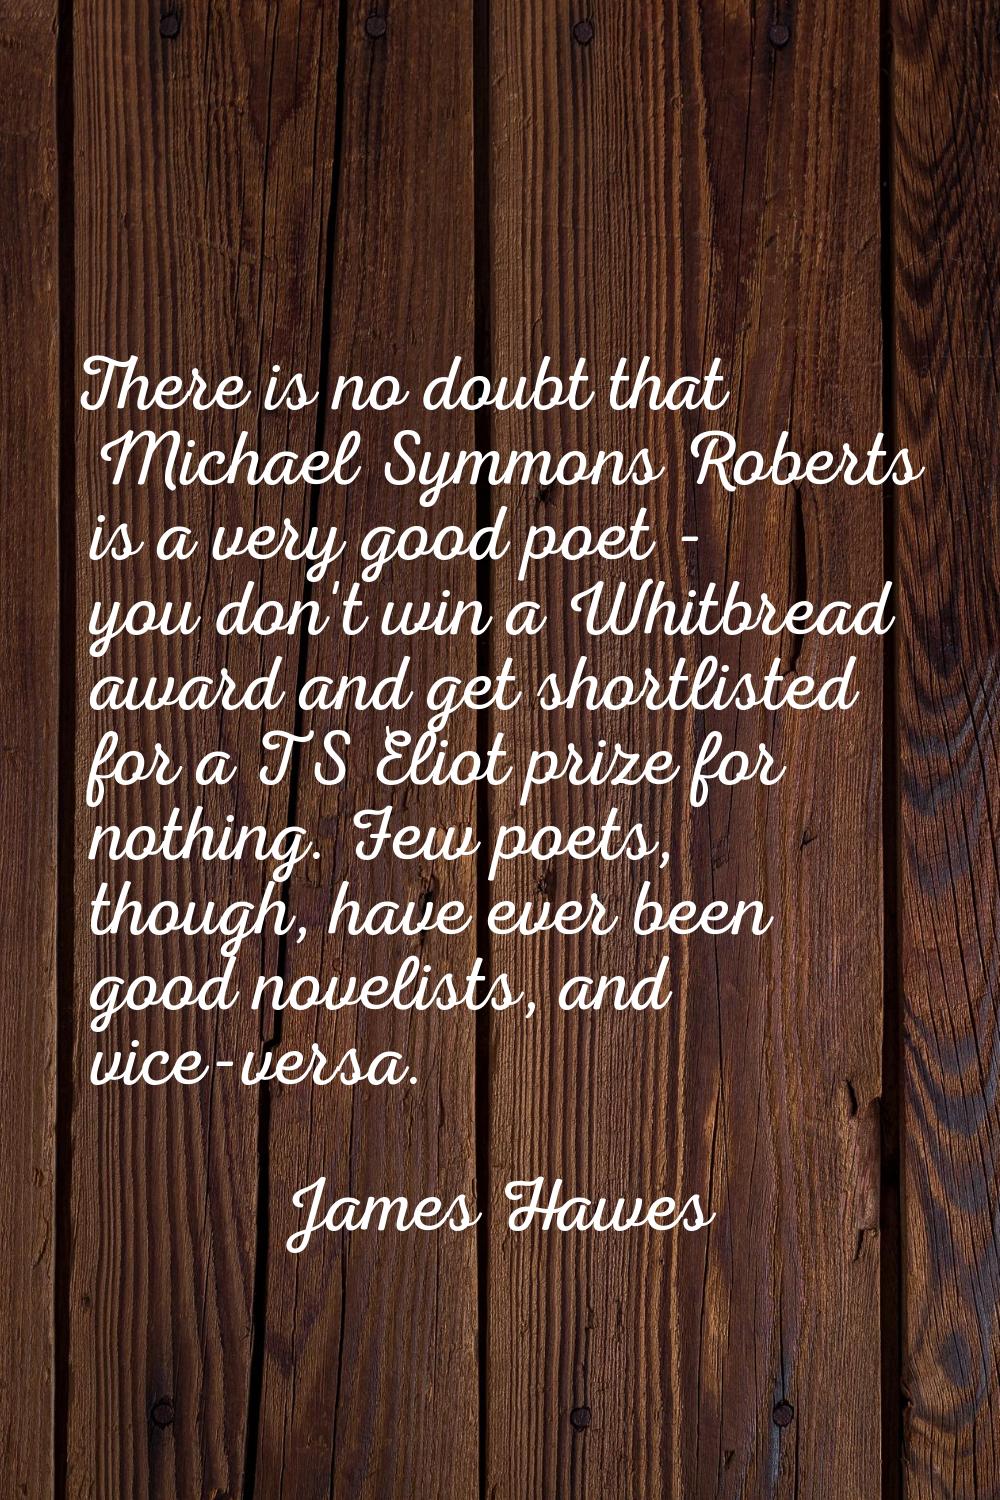 There is no doubt that Michael Symmons Roberts is a very good poet - you don't win a Whitbread awar